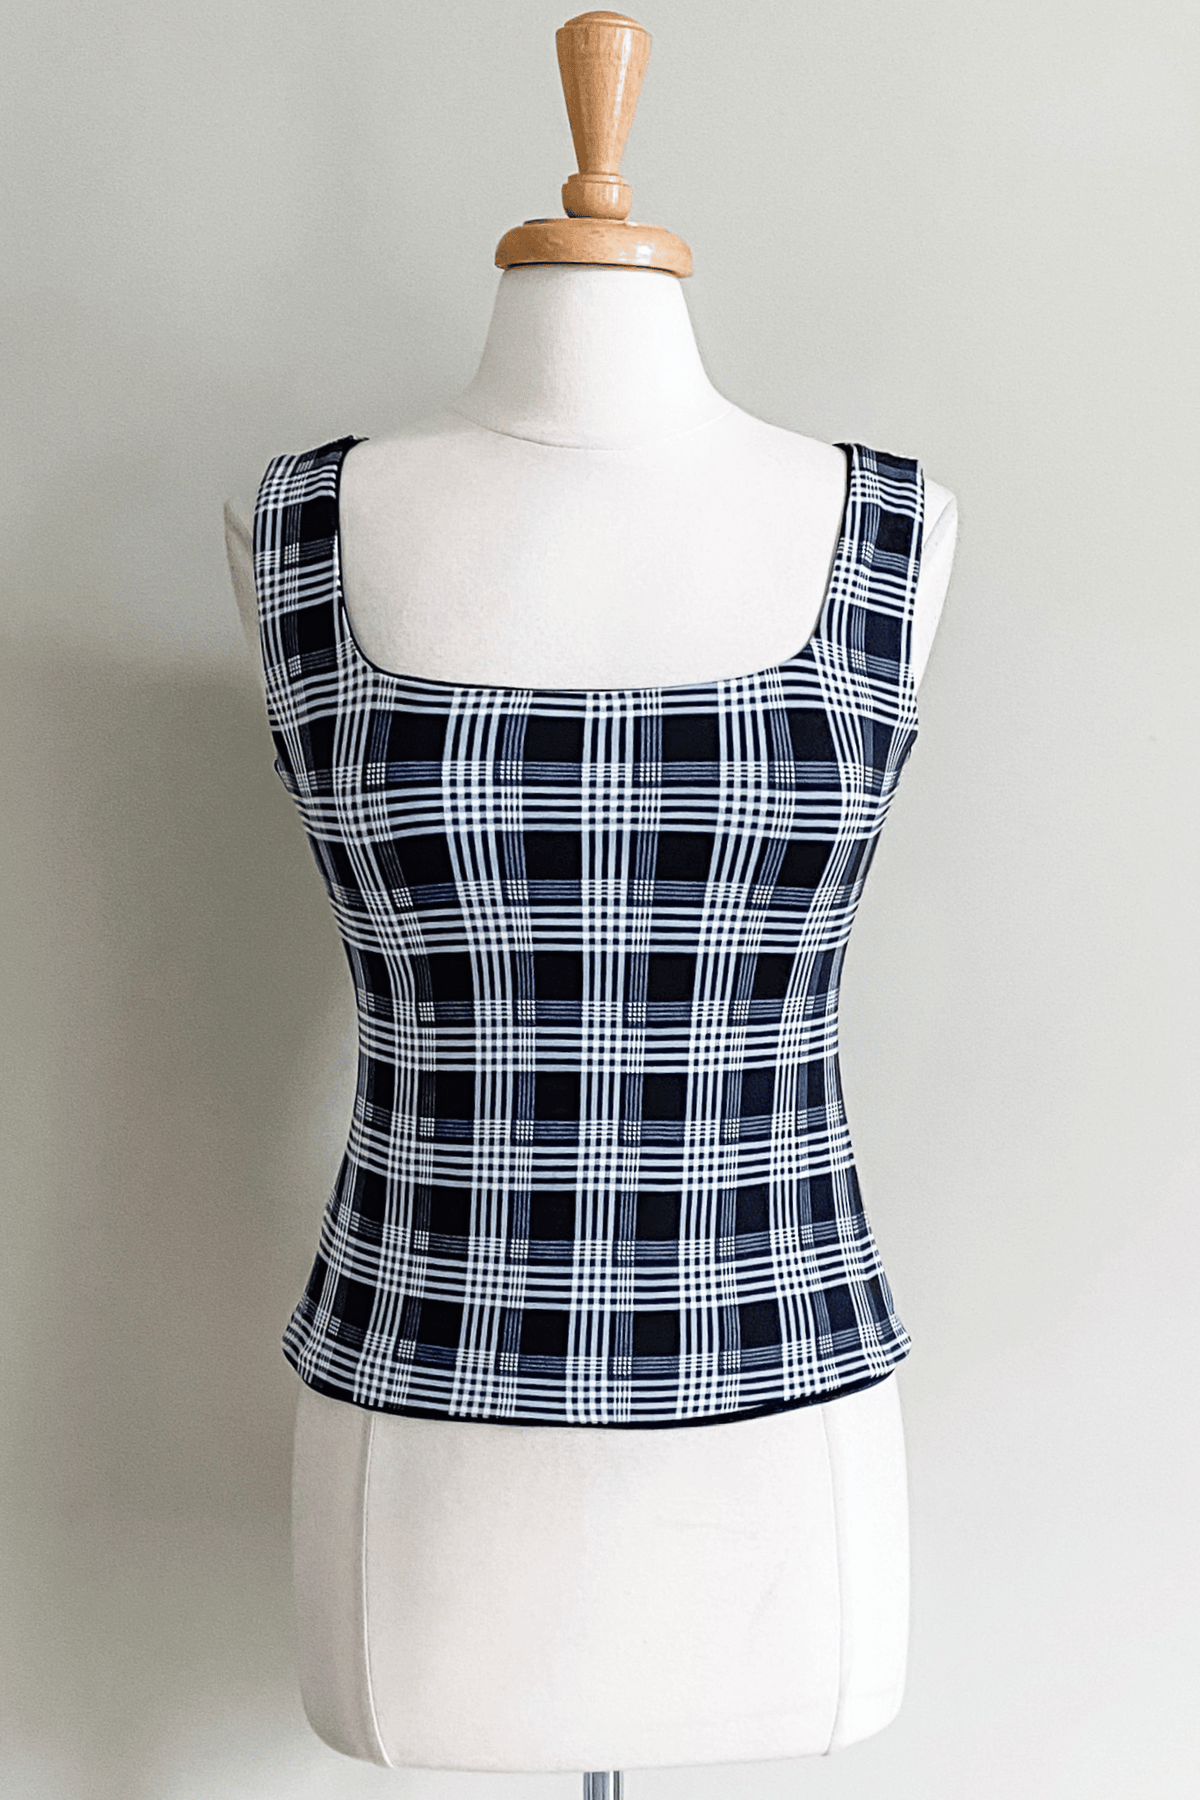 Reversible Bralette in Black White Plaid Fall 2023 Collection from Diane Kroe